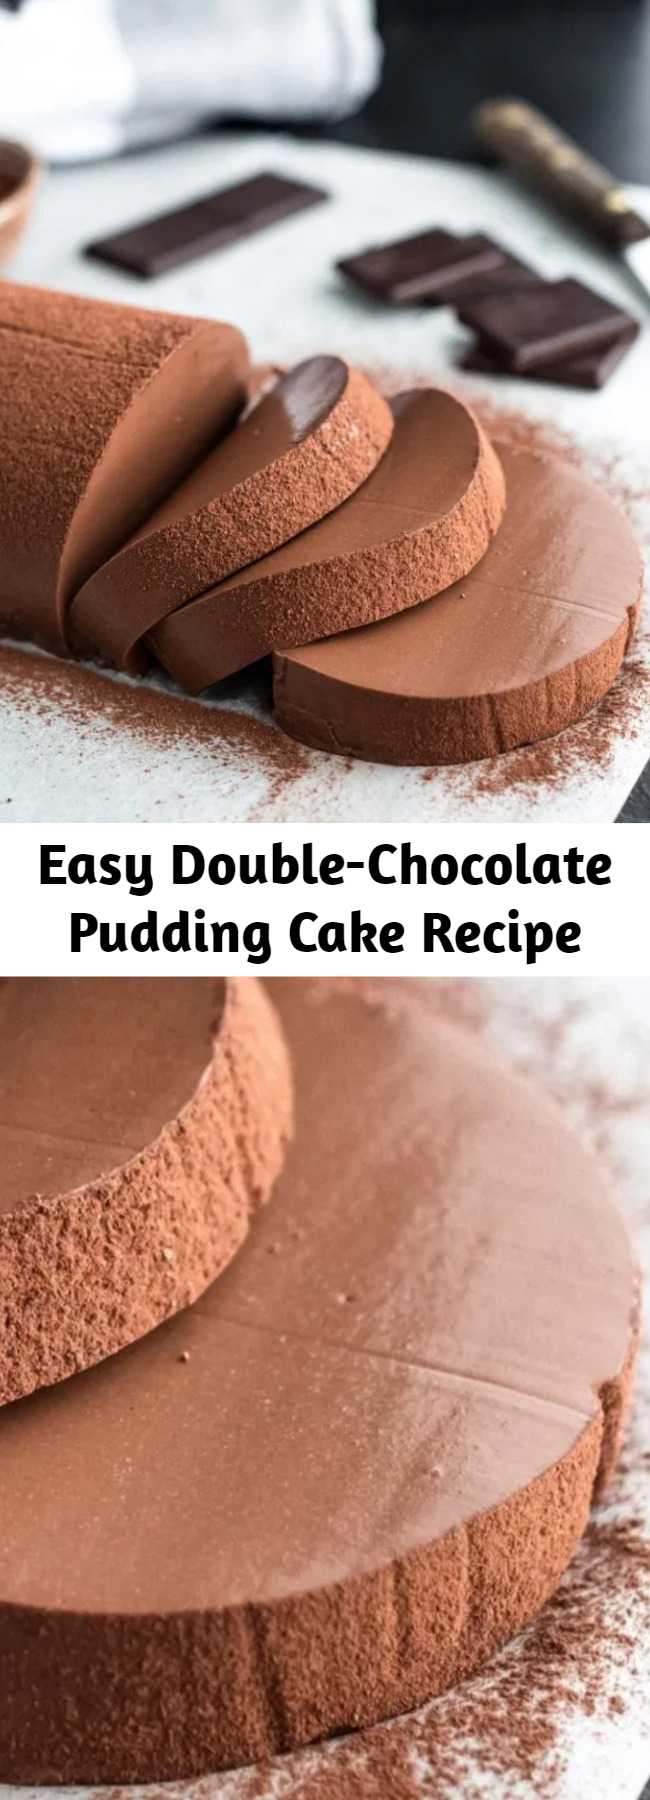 Easy Double-Chocolate Pudding Cake Recipe - Are you looking for a super creamy and chocolaty dessert that everyone will fall in love with? You do?! Then this Double-Chocolate Pudding Cake is perfect for you! It’s super easy to prepare and you only need a few ingredients and little time to make it. Btw this recipe is also completely dairy & gluten free!